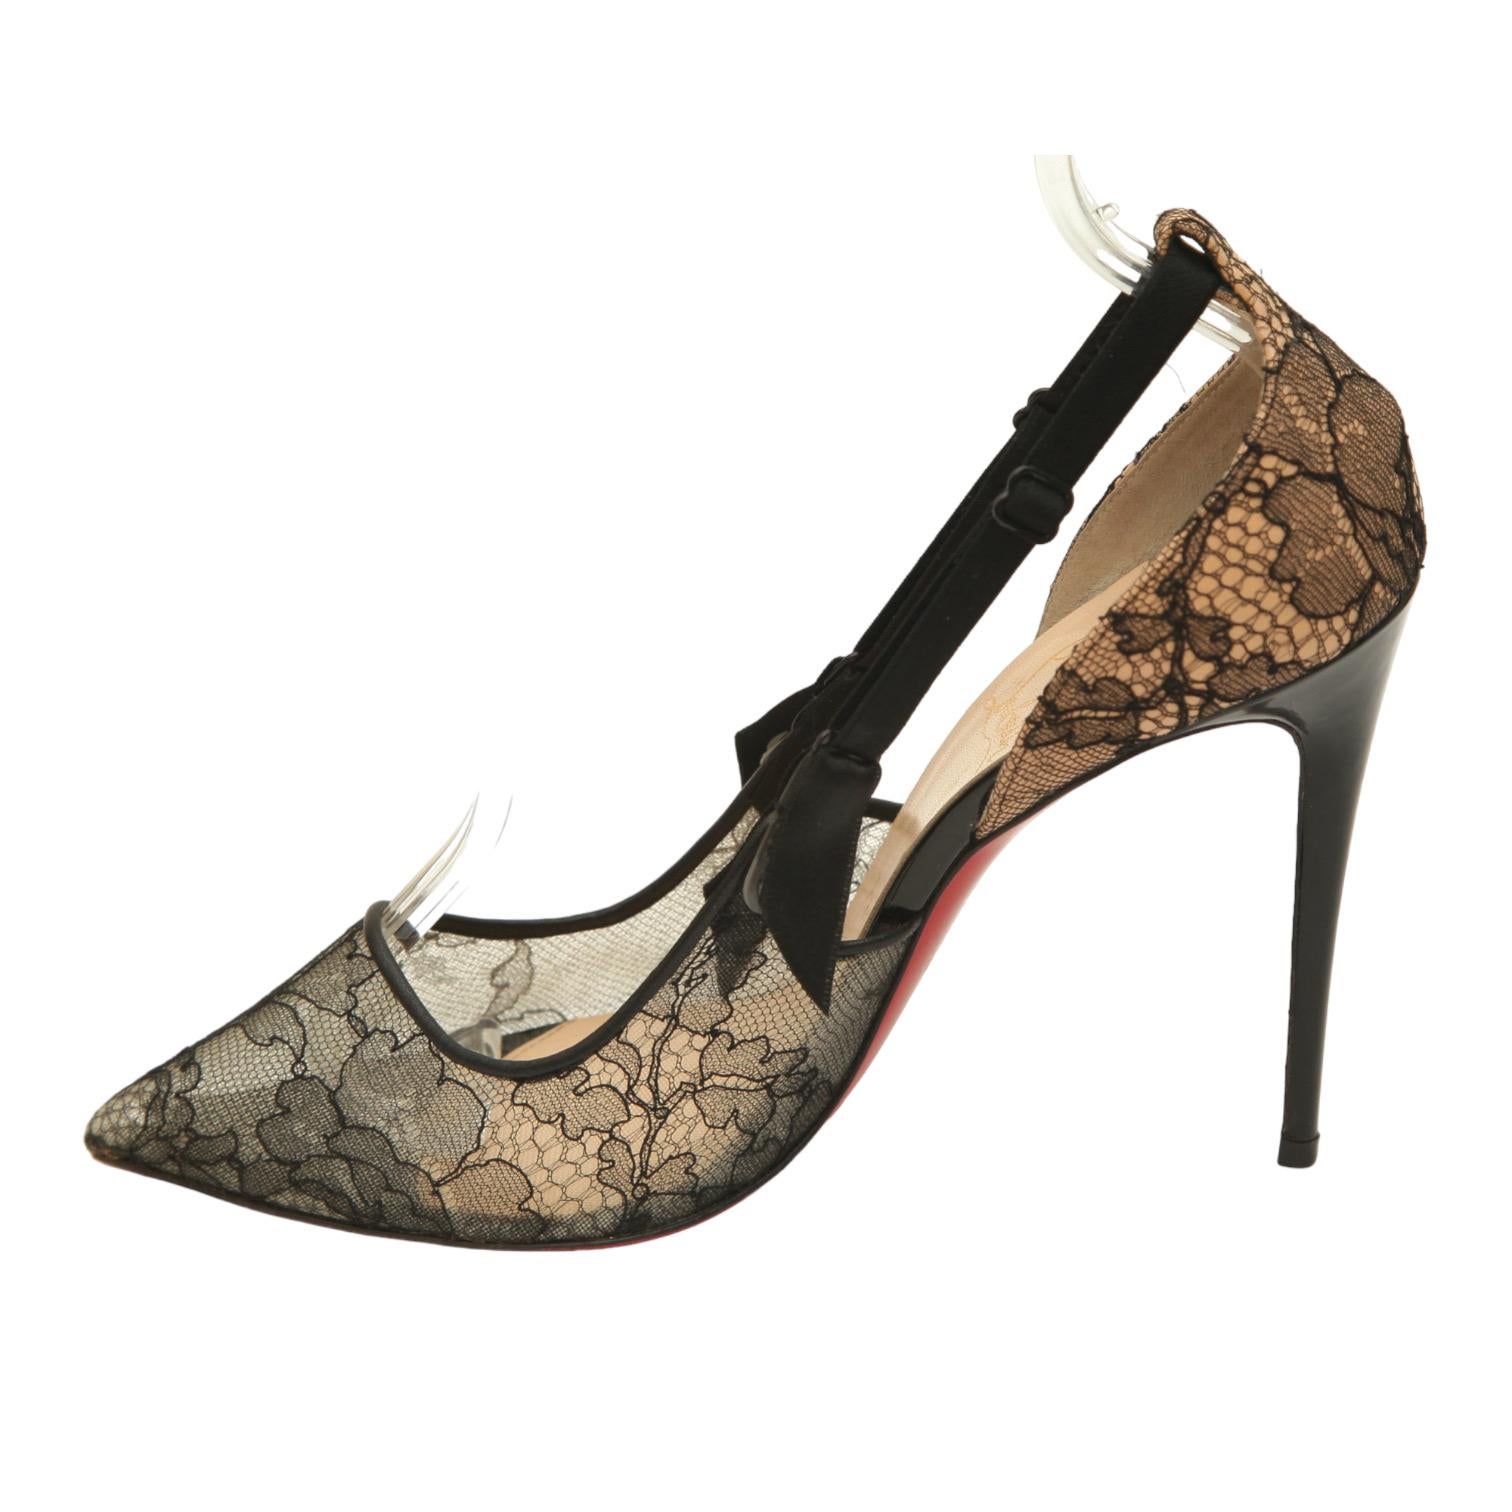 CHRISTIAN LOUBOUTIN Black Satin Lace HOT JEANBI 100 Pump Floral Heel 100mm 38.5 In Good Condition In Hollywood, FL